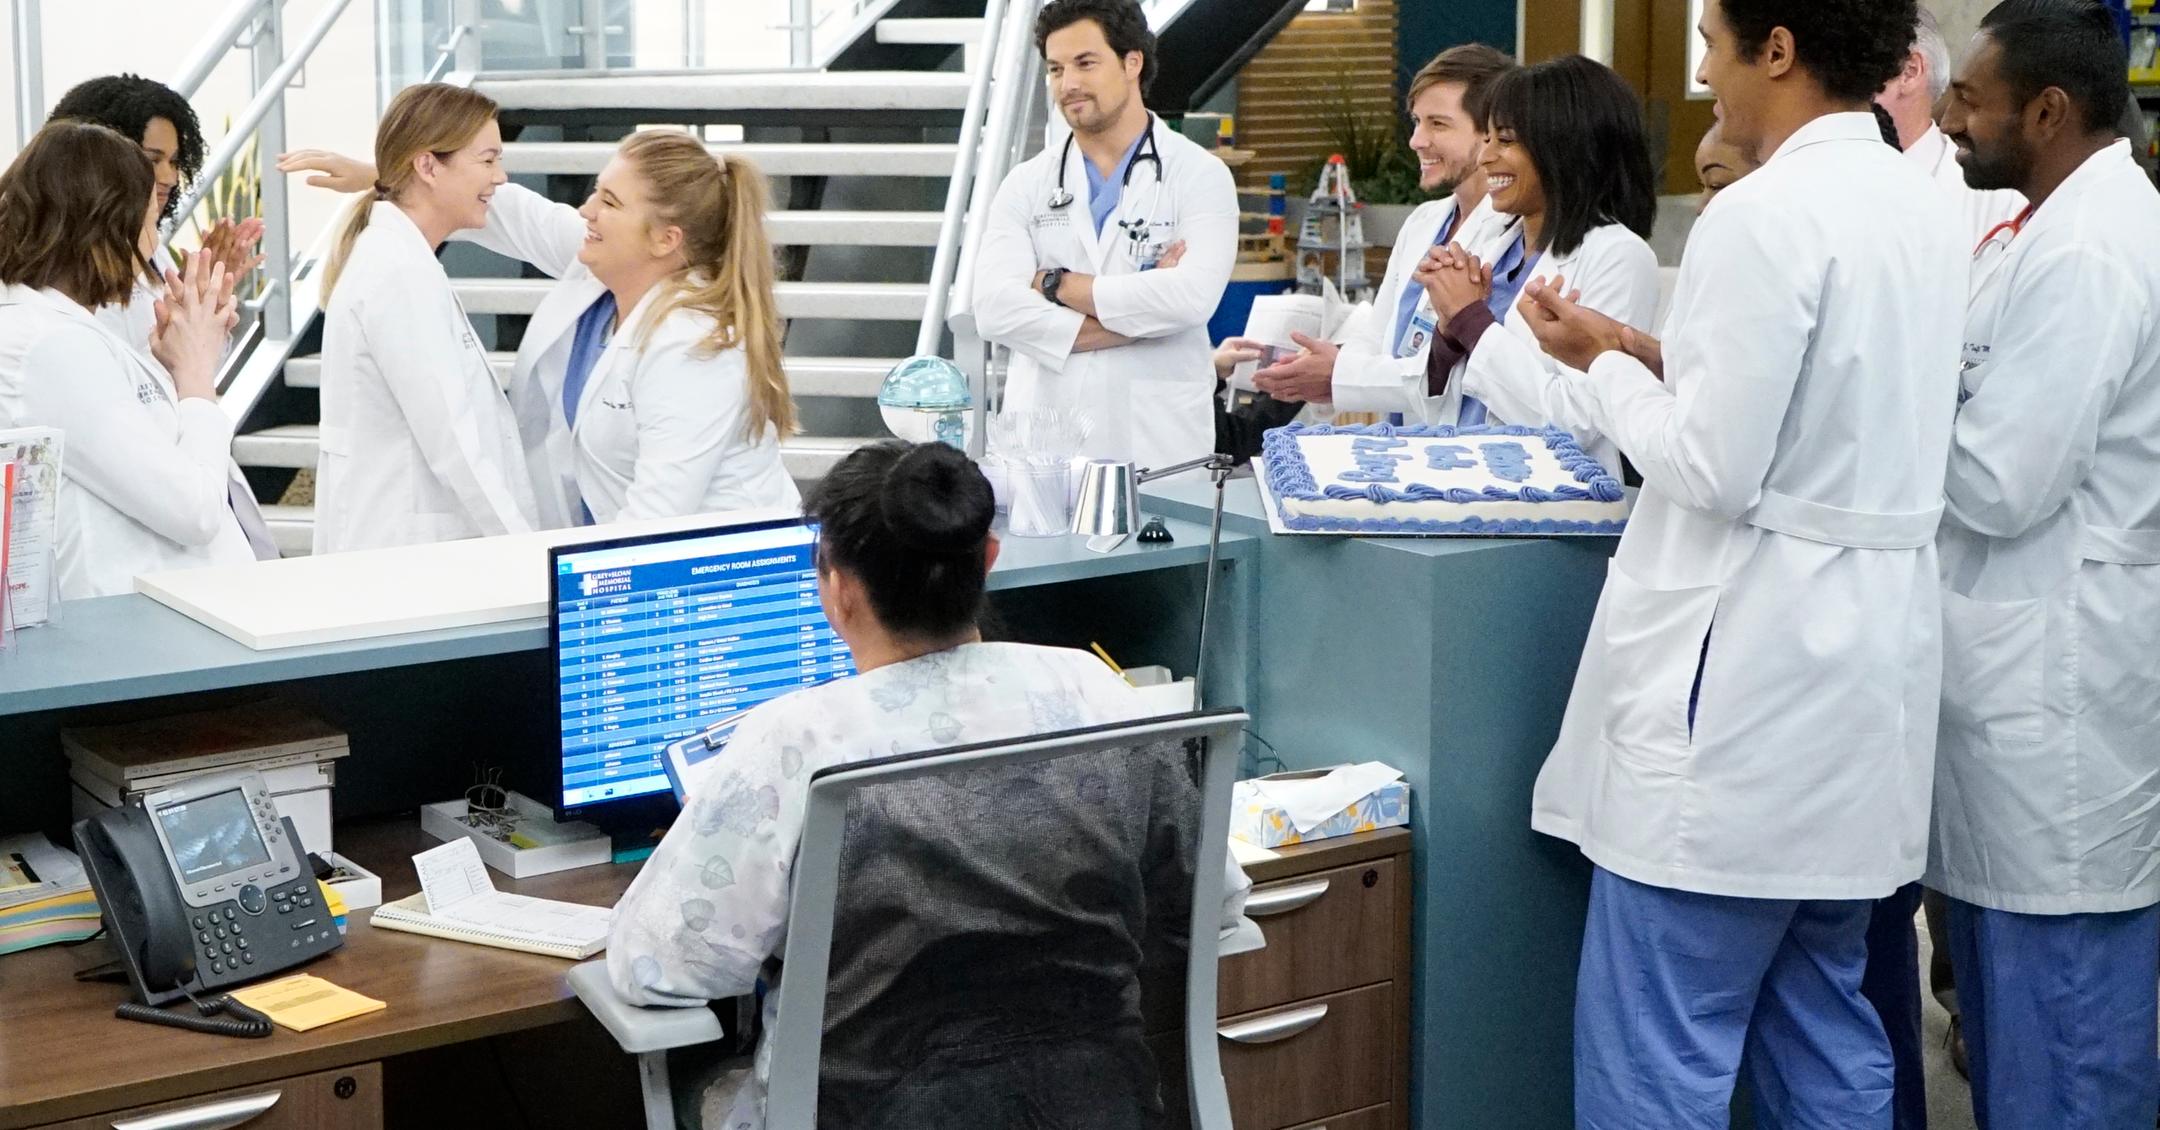 When Does 'Grey's Anatomy' Come Back in Spring 2022?